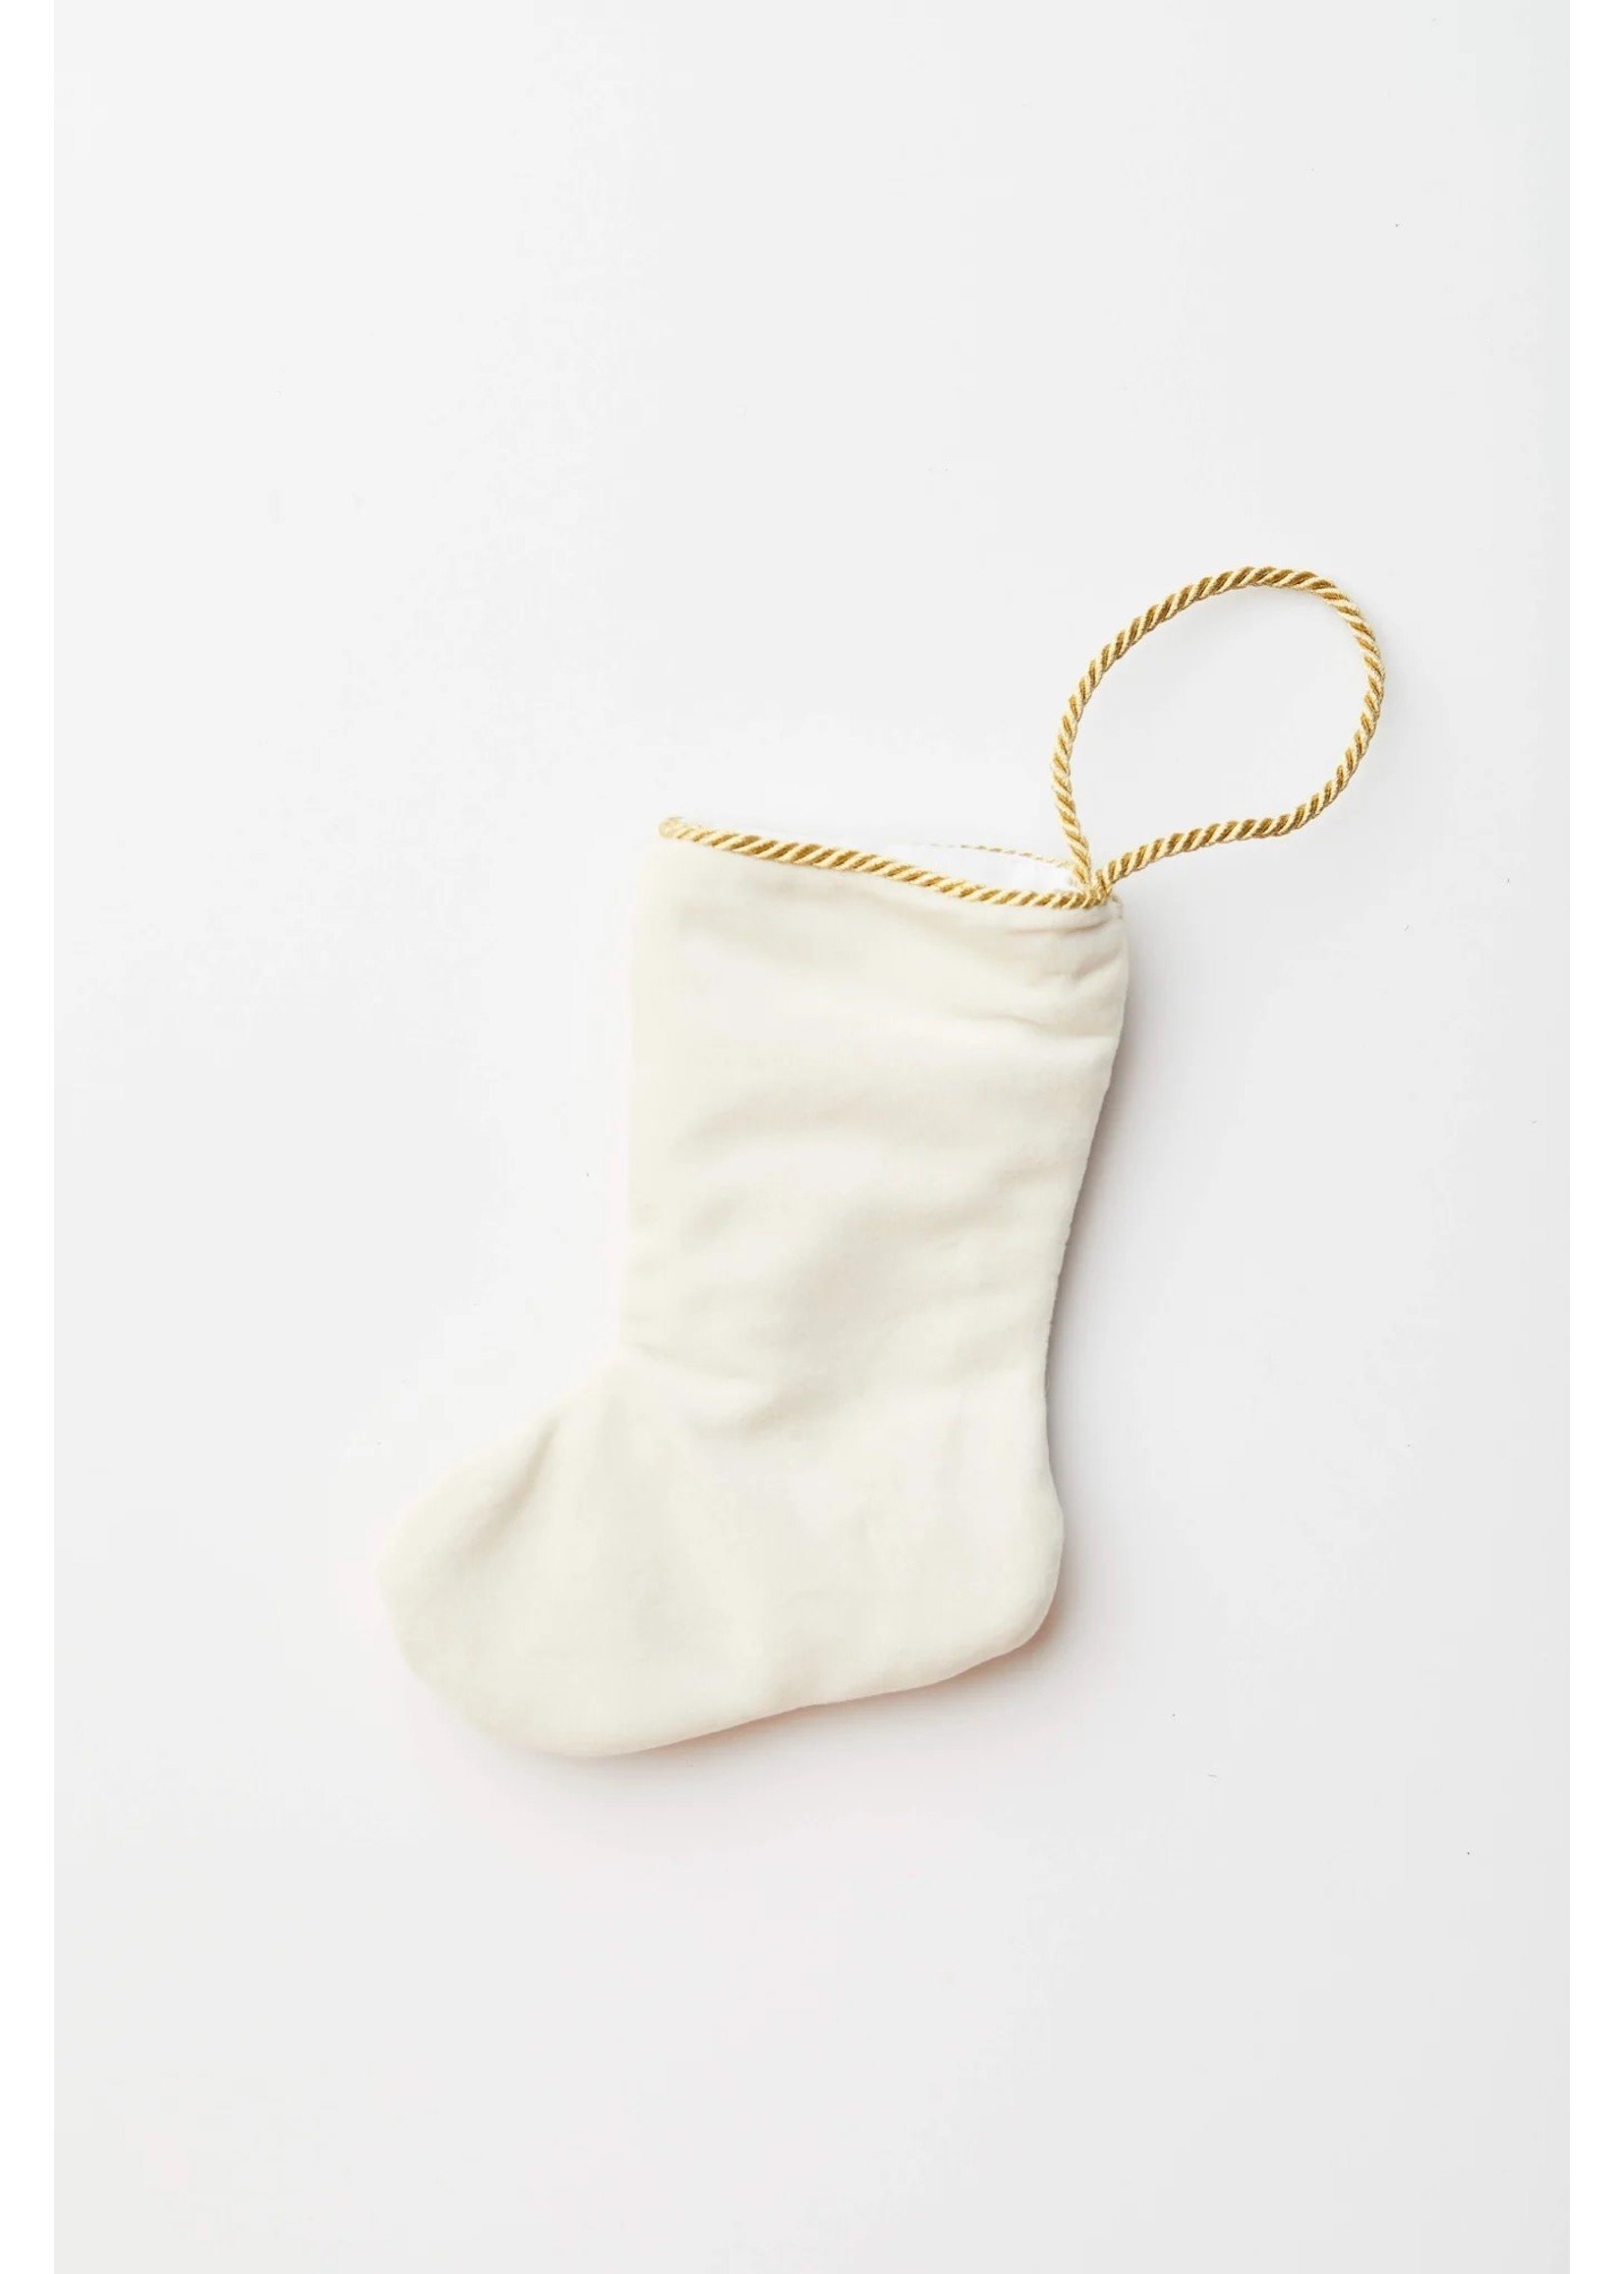 Bauble Stockings Bauble Stocking - Christmas Garland Gala by Dogwood Hill